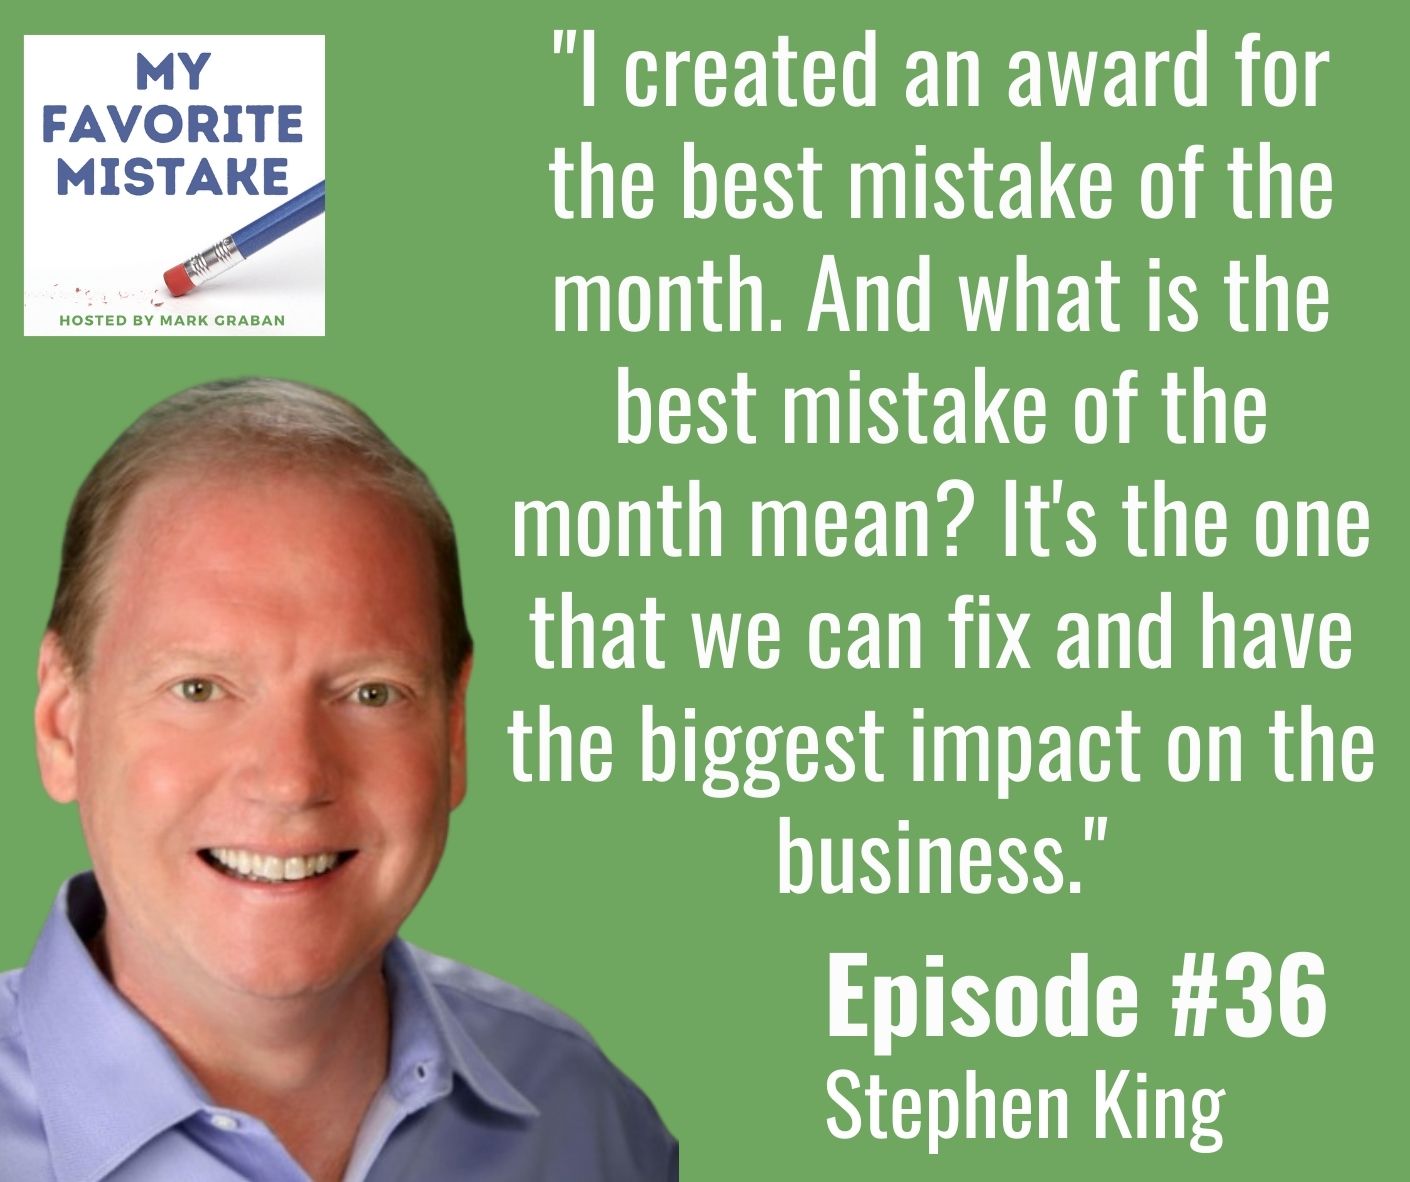 "I created an award for the best mistake of the month. And what is the best mistake of the month mean? It's the one that we can fix and have the biggest impact on the business."